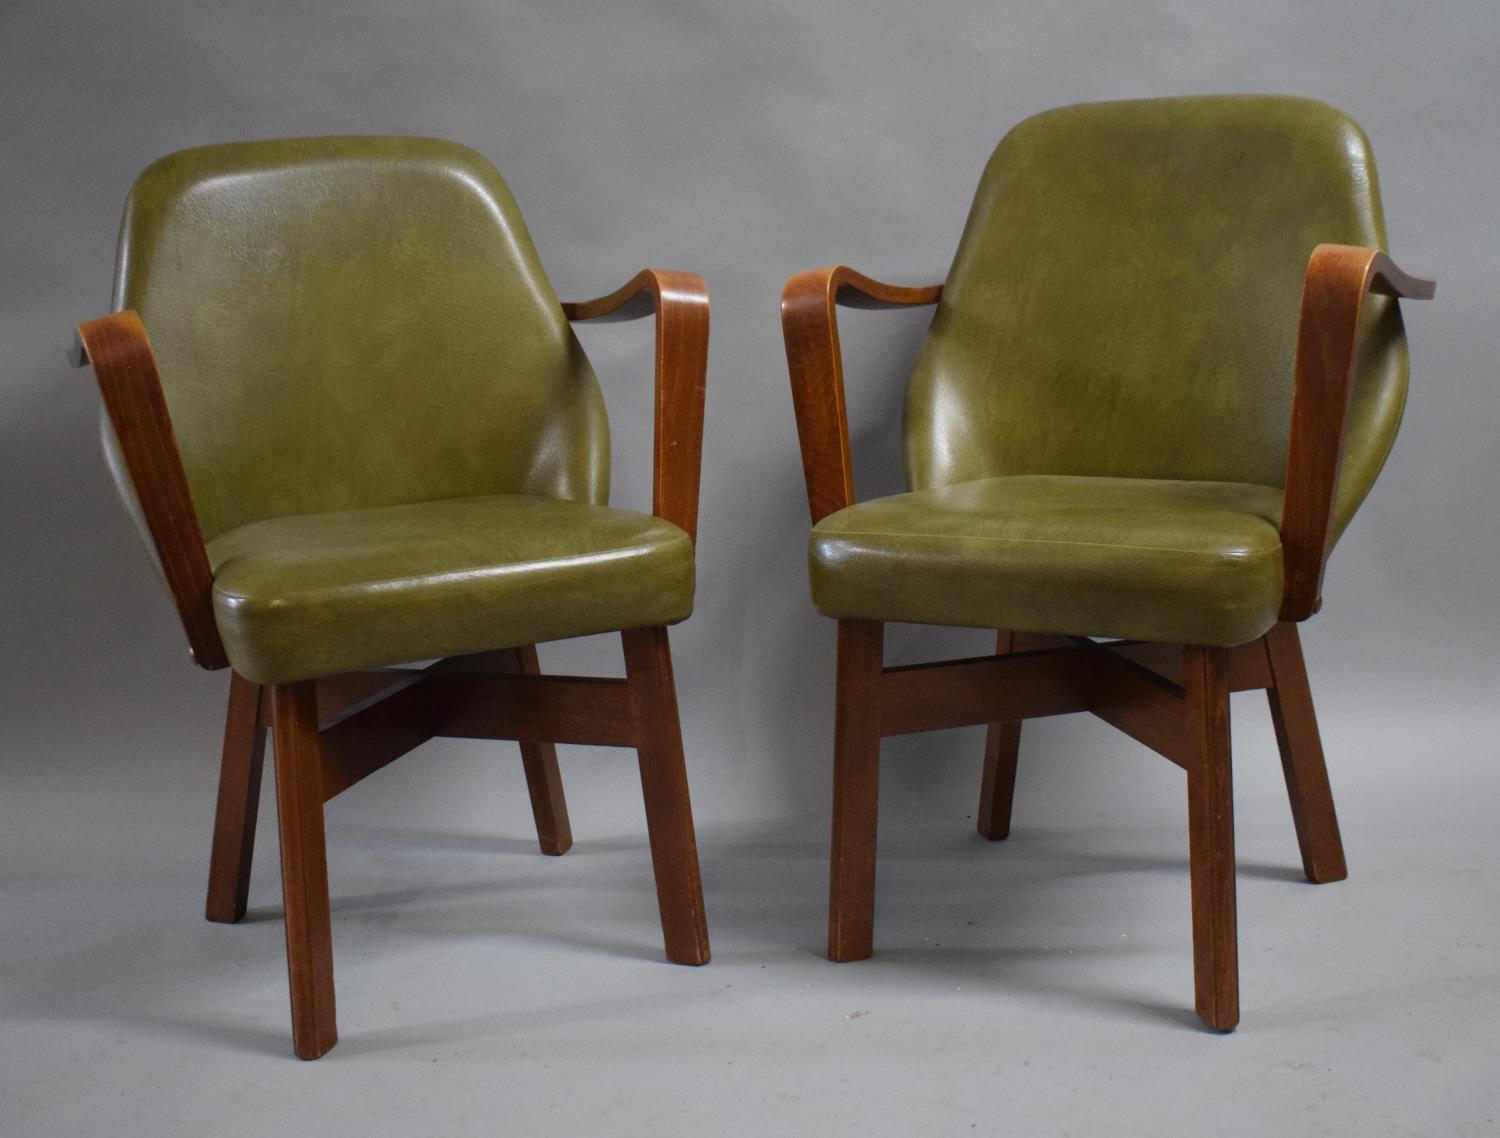 A Pair of Vintage Leather Effect Upholstered Open Armchairs - Image 2 of 4